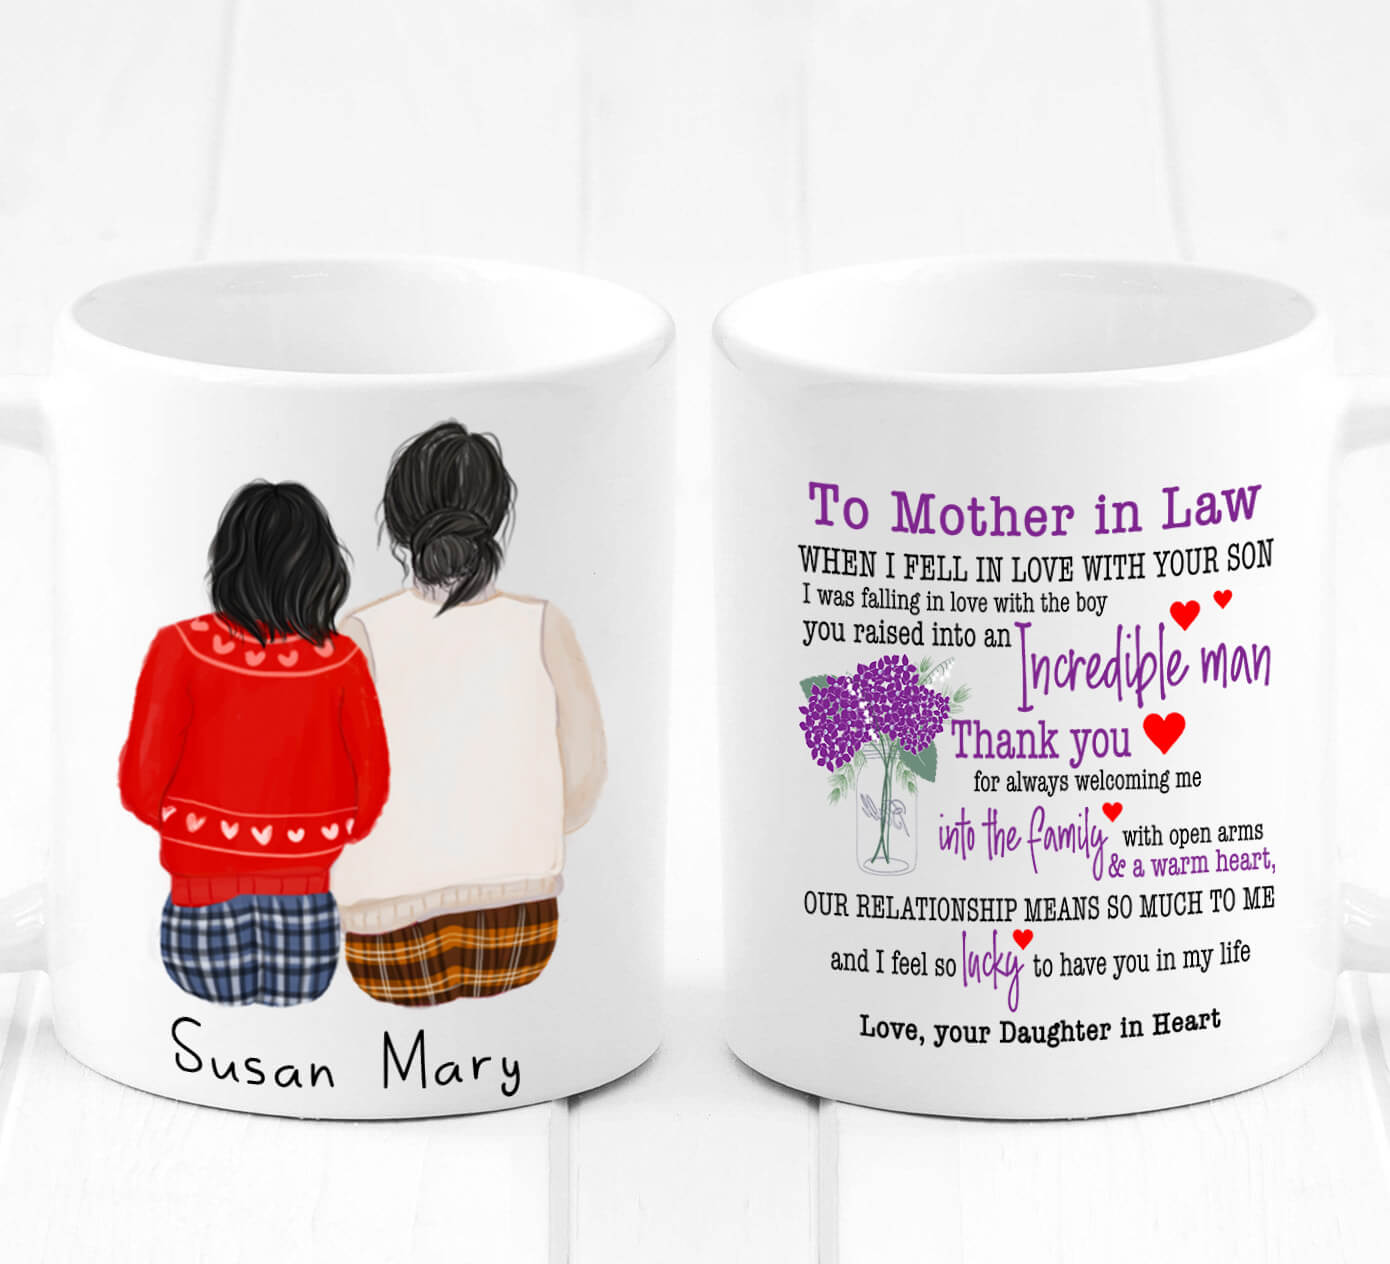 Best Gift To Moms Of Boys, Personalized Mom Of Boys Accent Coffee Mug